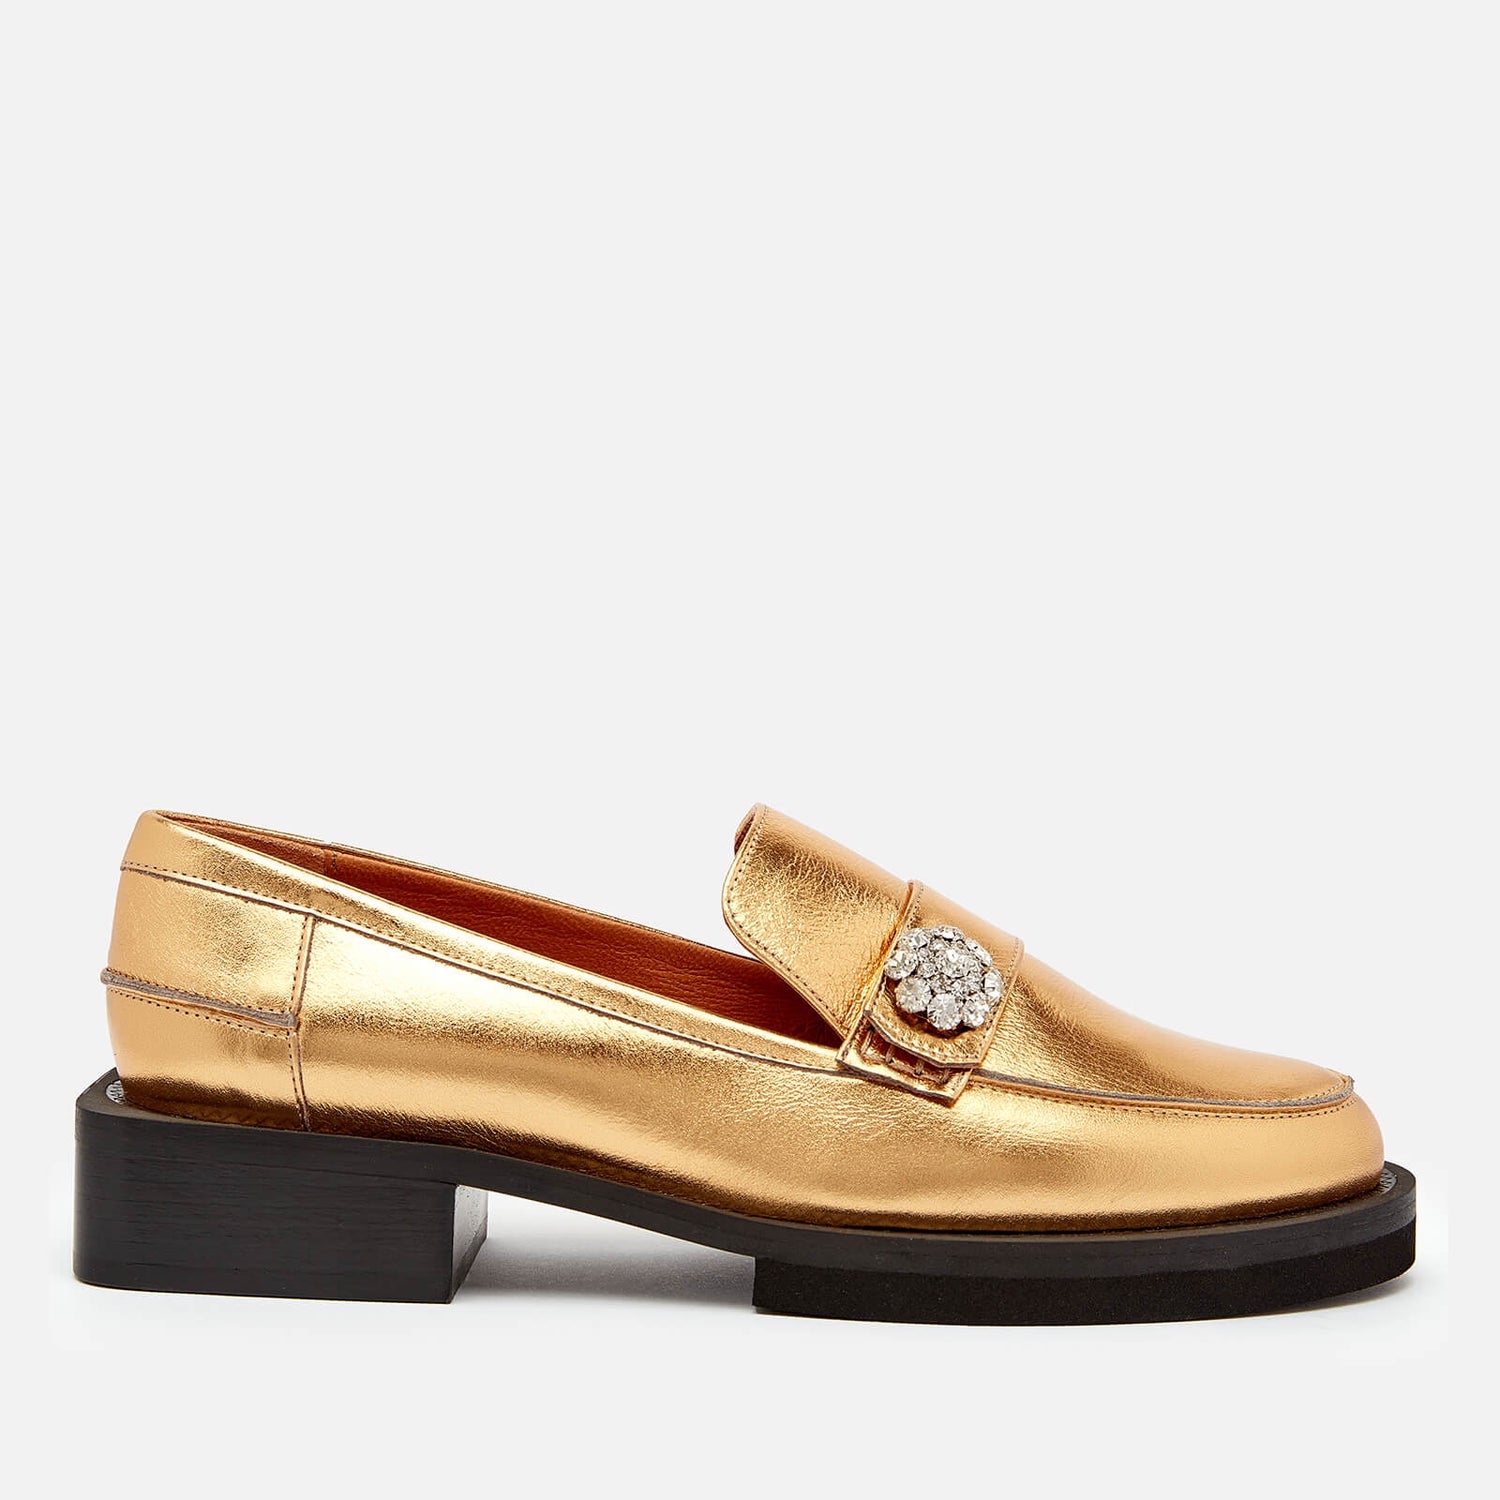 Ganni Women's Metallic Leather Loafers - Gold - Free UK Delivery Available